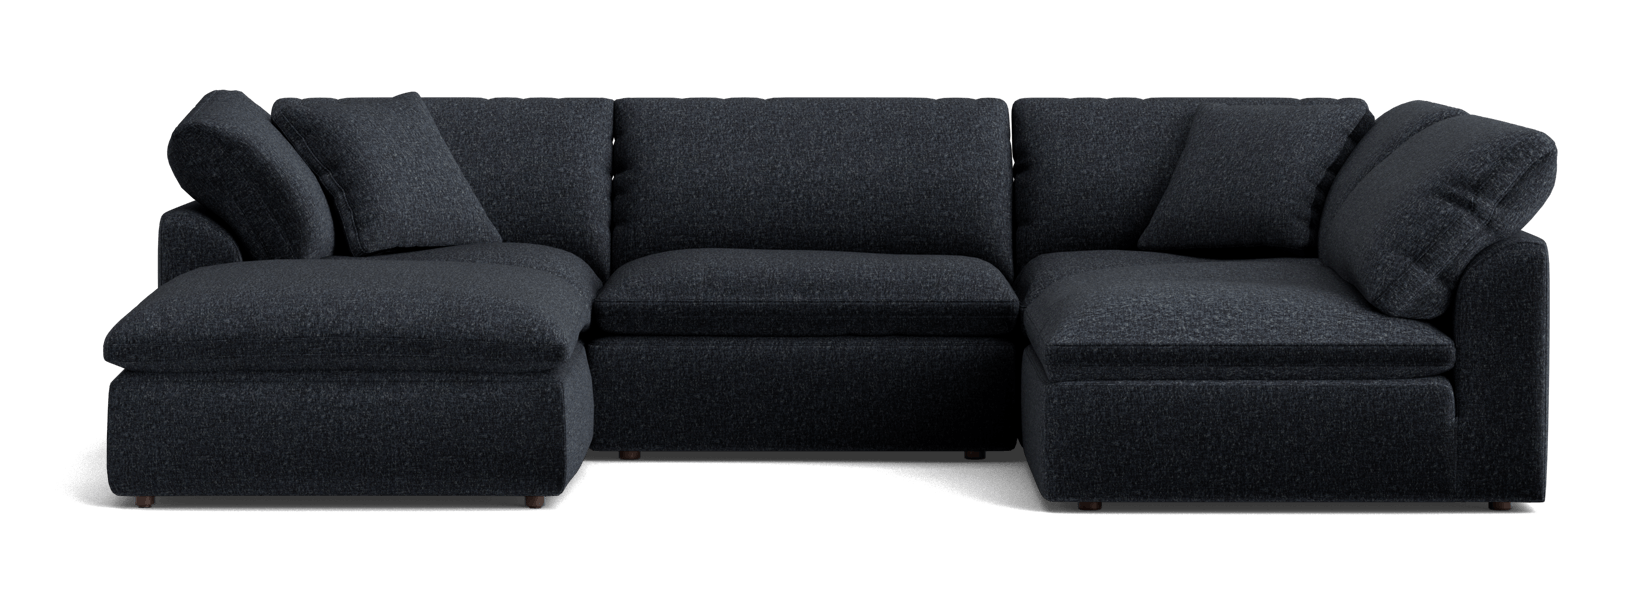 bryant sofa bumper sectional %285 piece%29 aerial eclipse